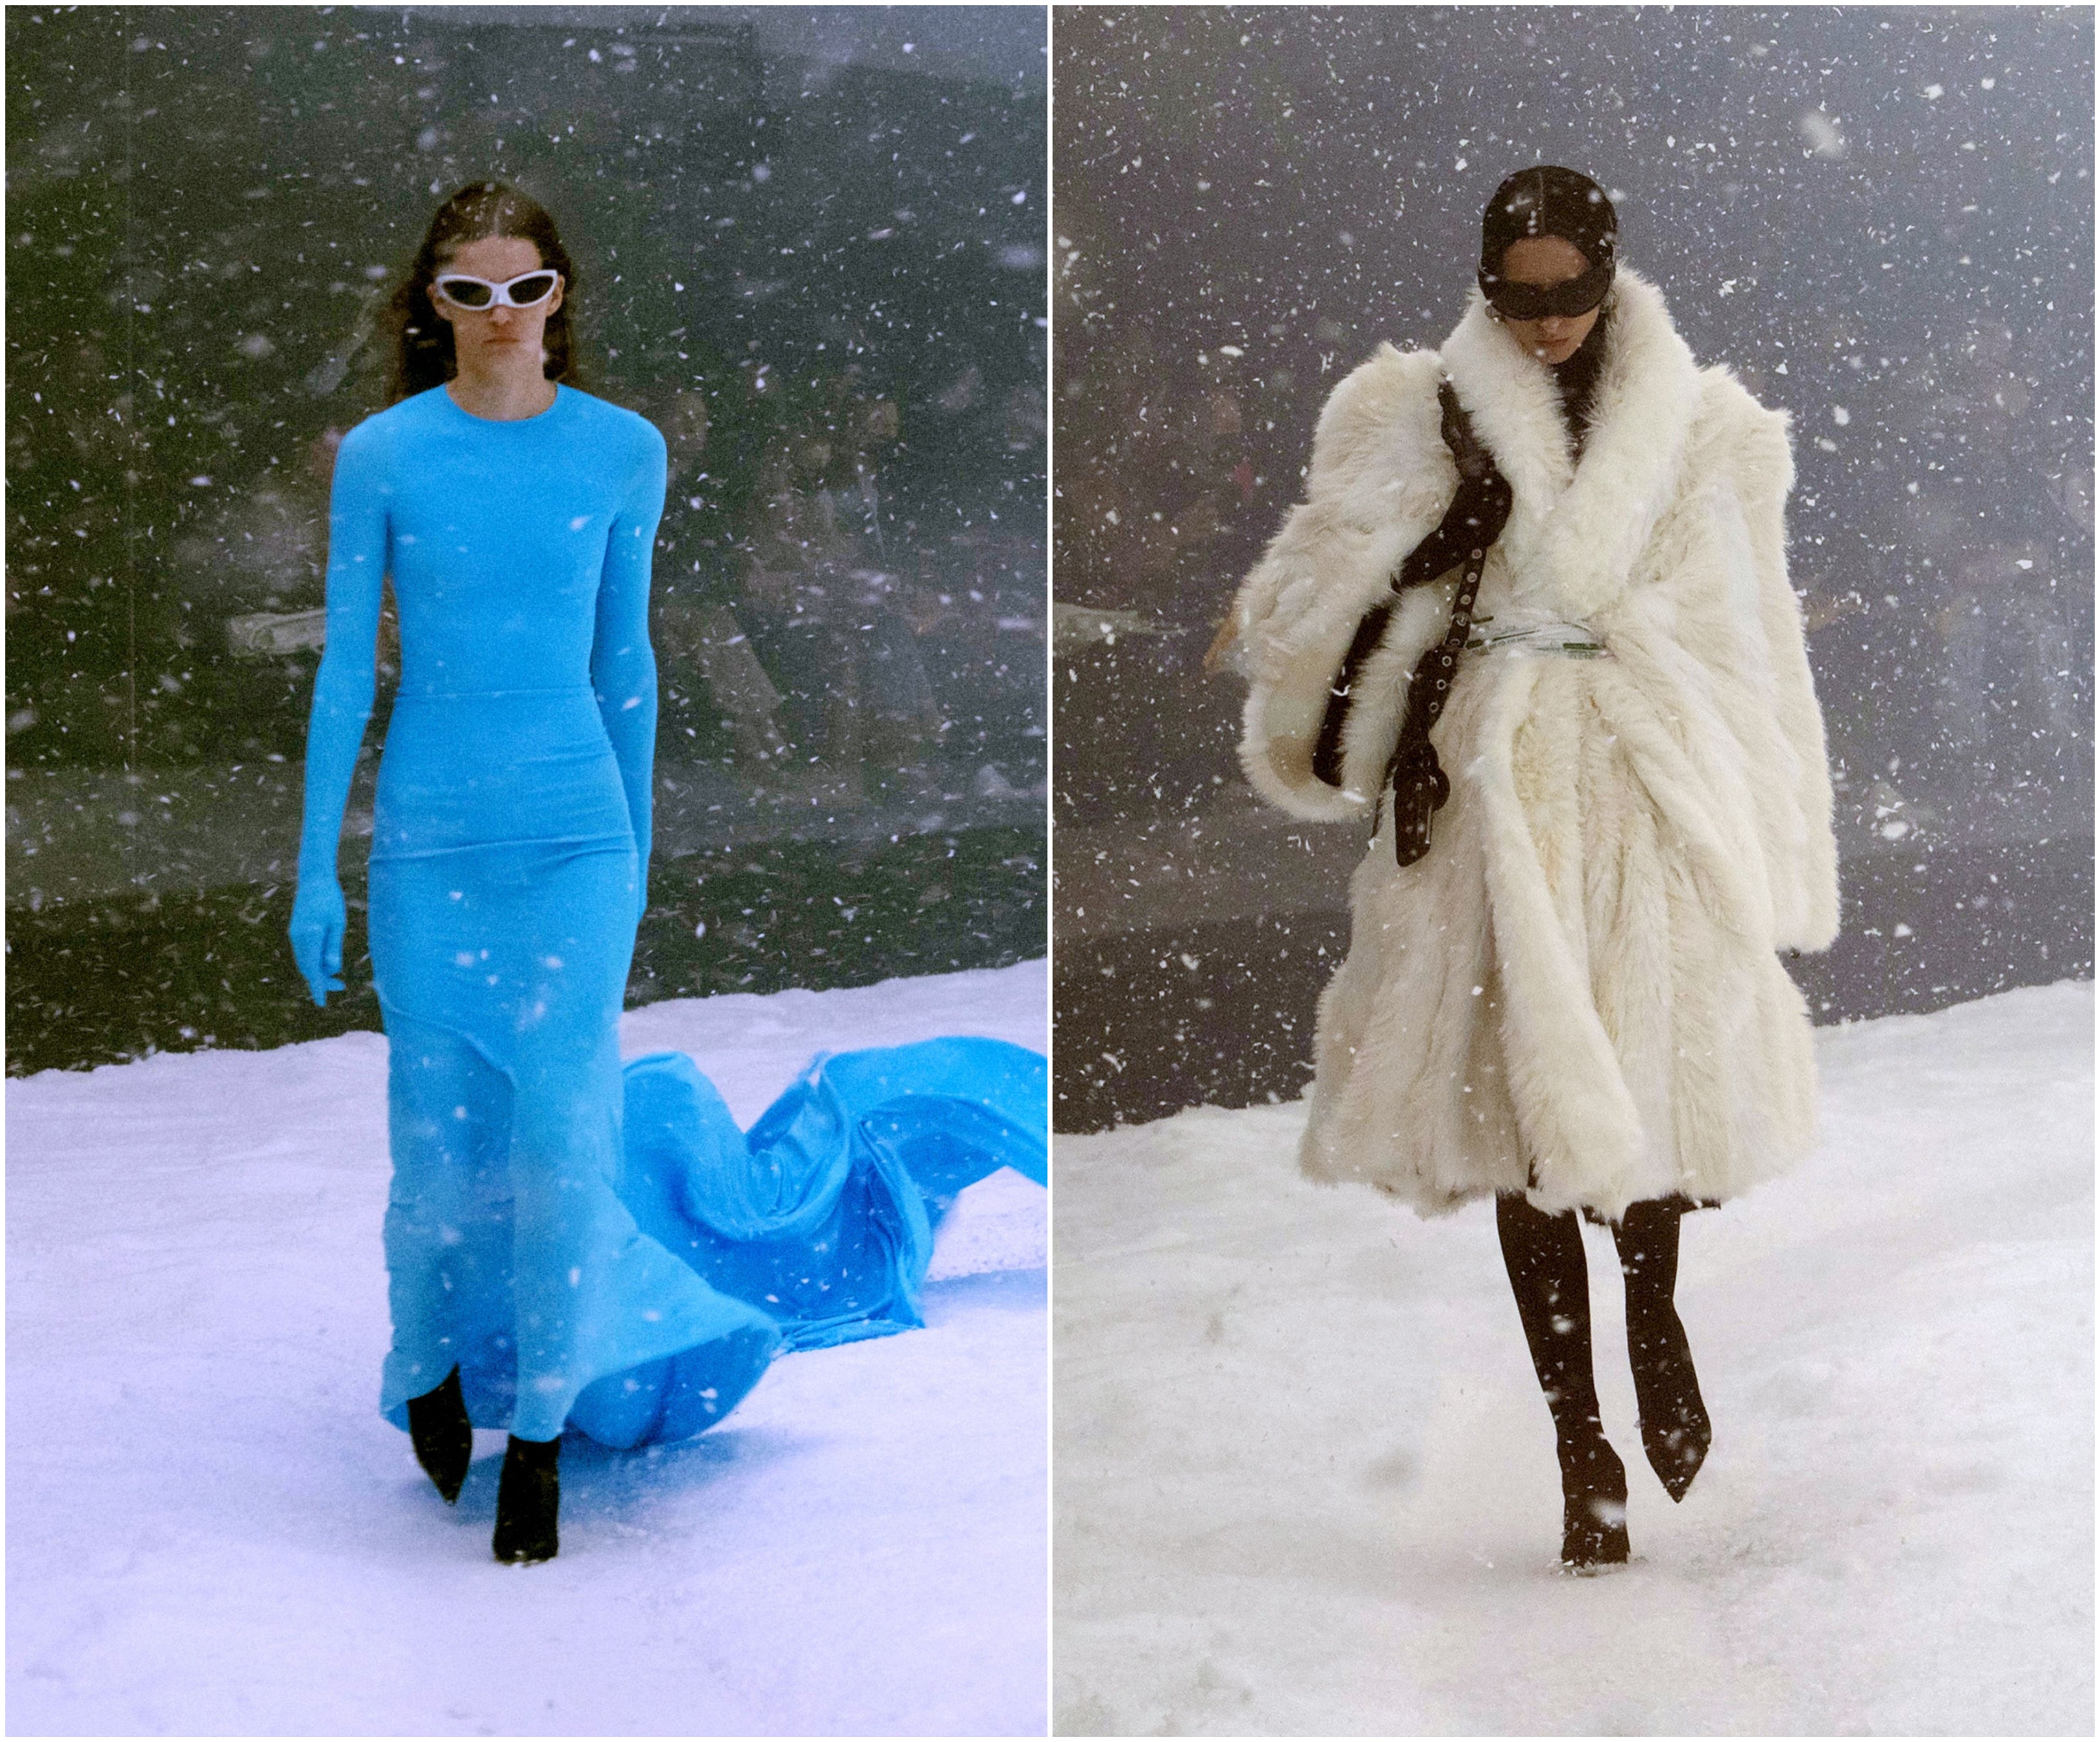 Models who walked in the show struggled forward against a makeshift snow blizzard